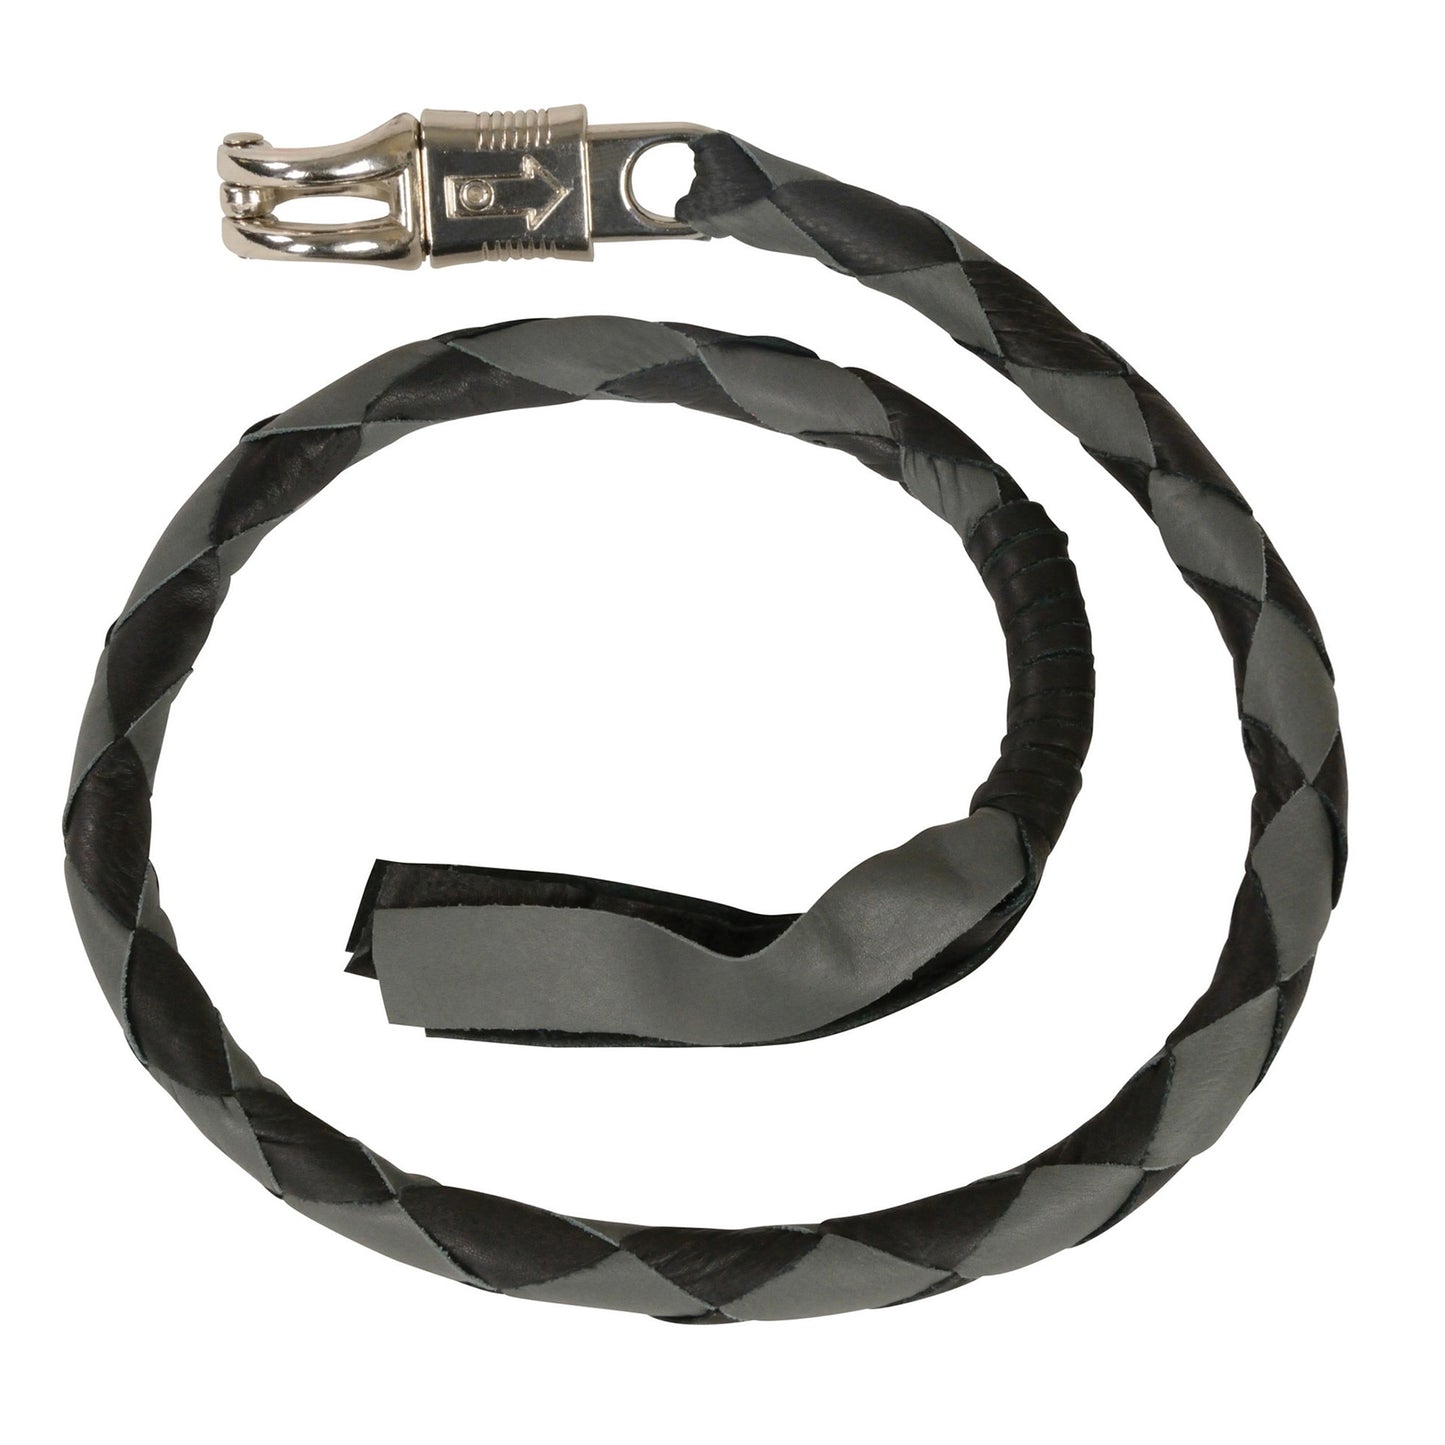 Leather “Get Back” Whip for Motorcycles